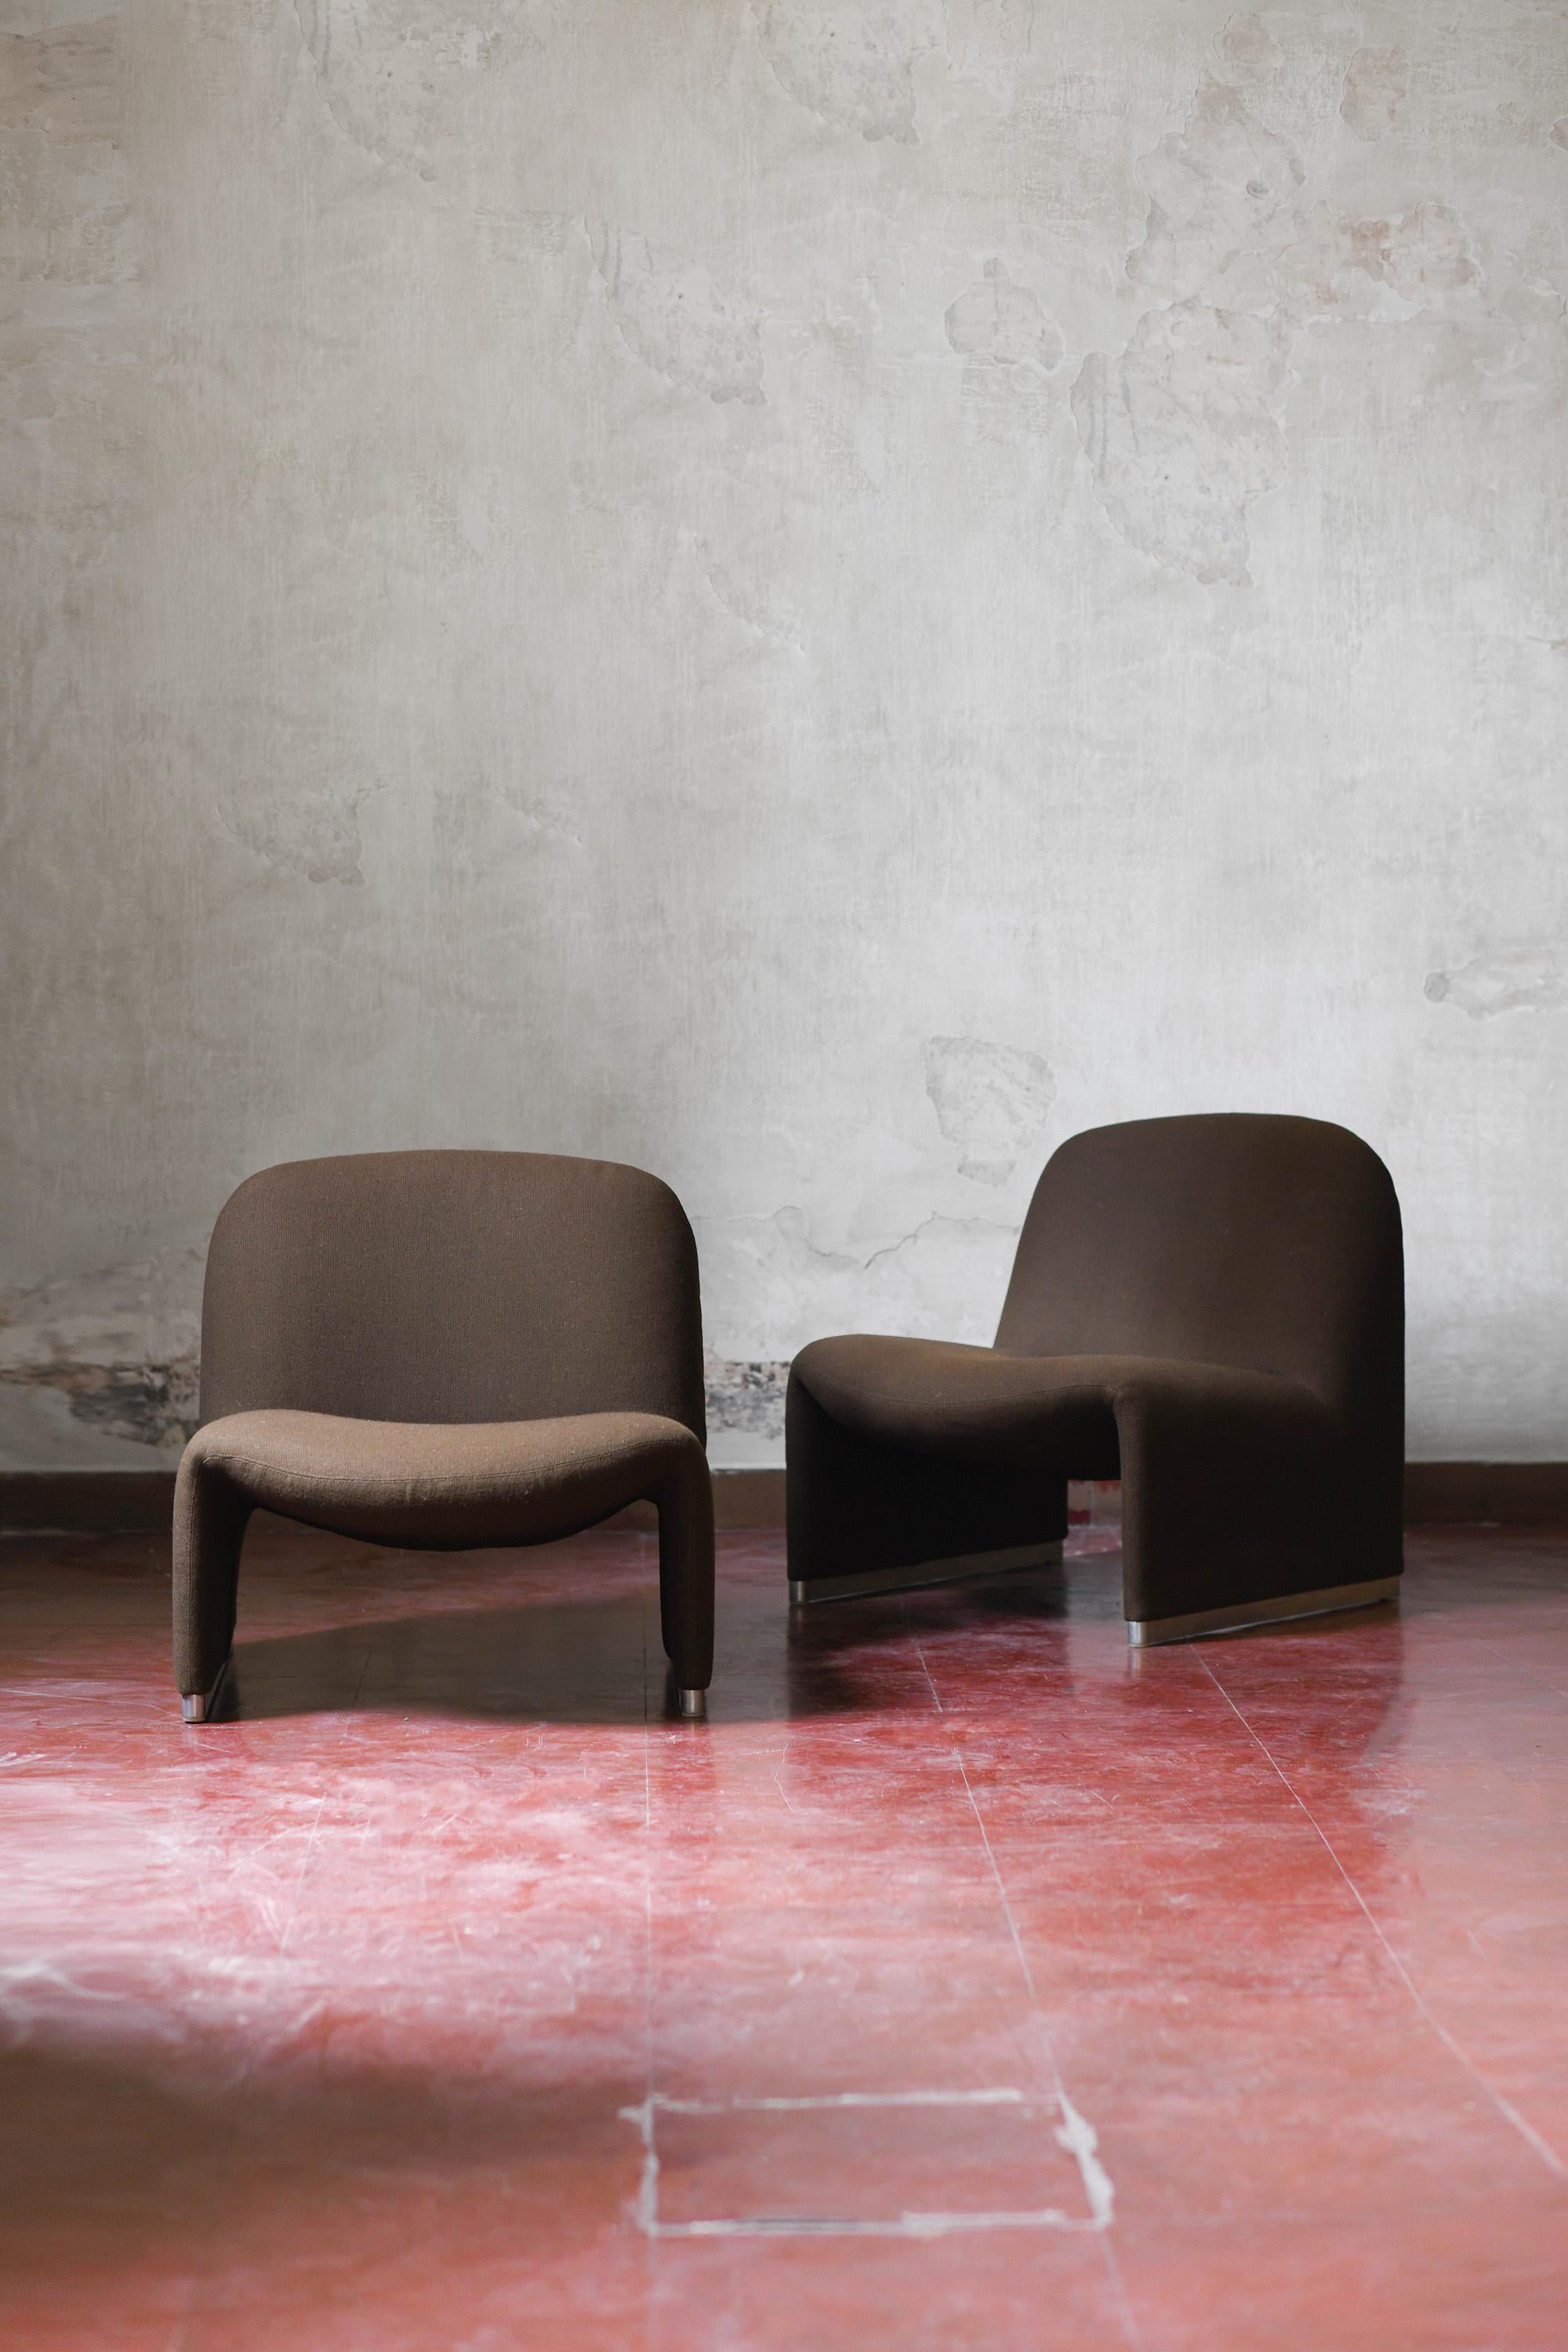 Pair of Alky armchairs by Giancarlo Piretti for Castelli, 1970
Product details
Dimensions: 63 W x 69 H x 75 D cm